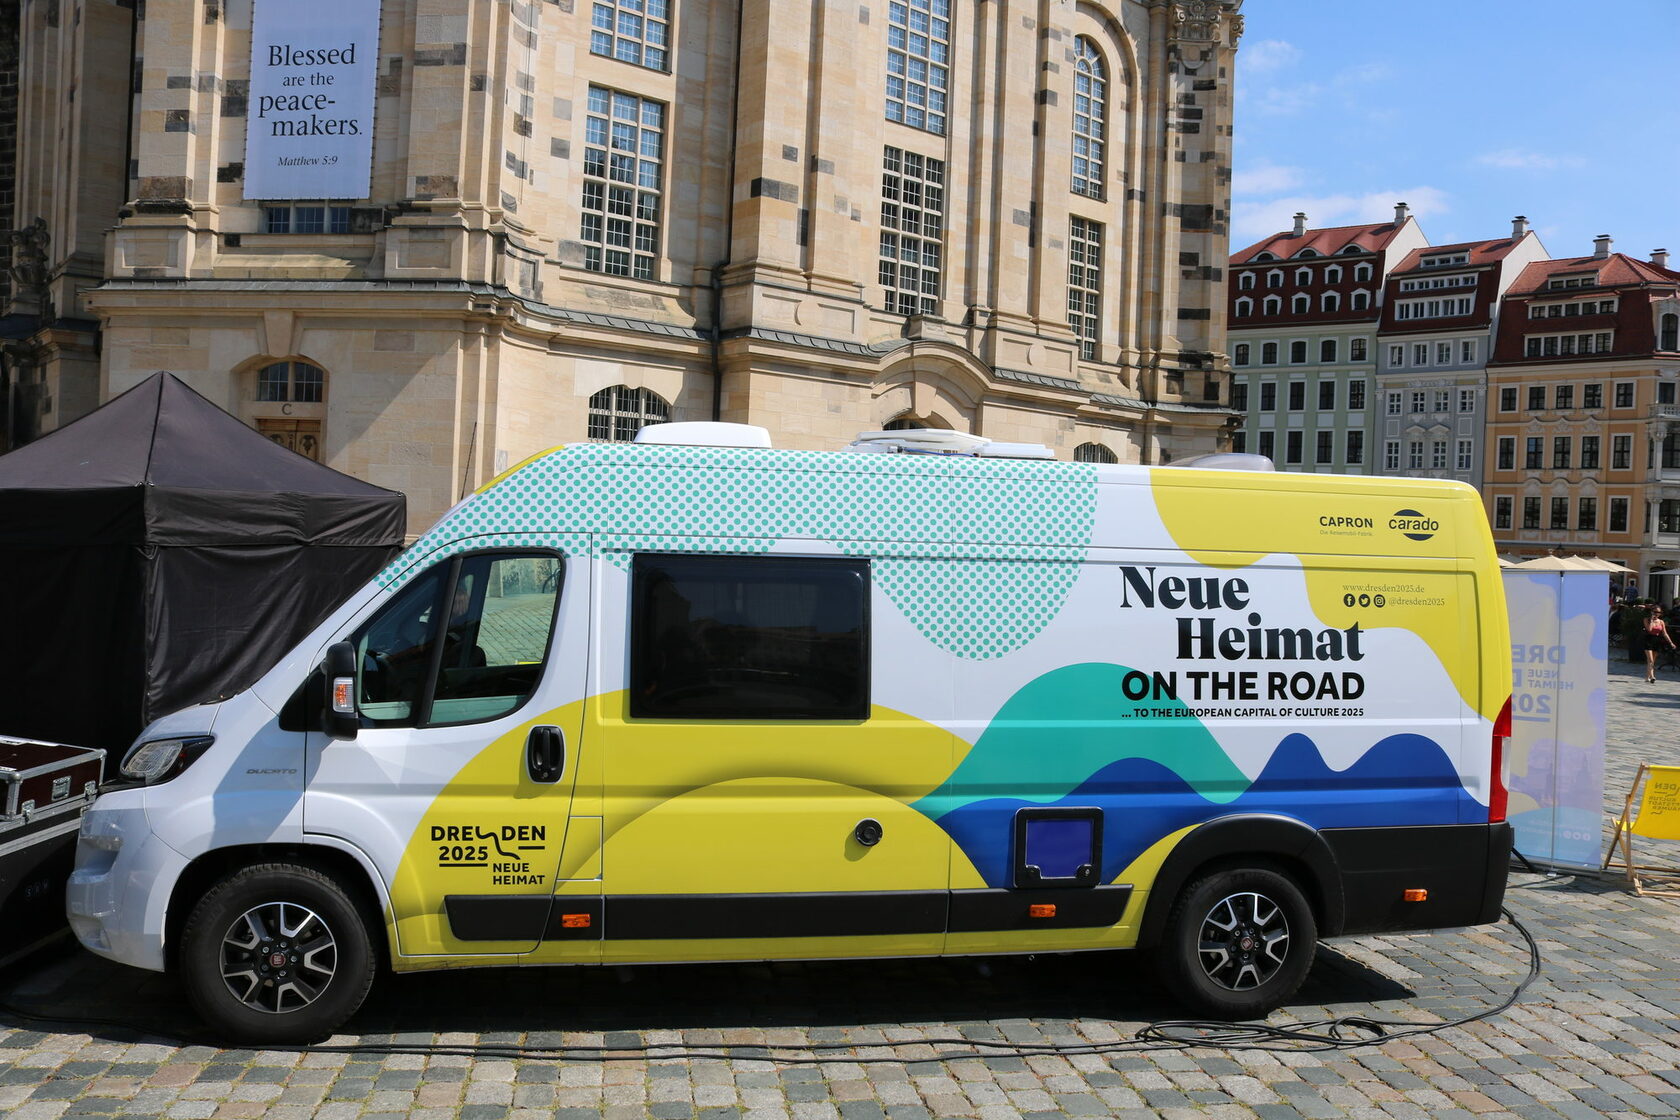 The "Neue Heimat on the road" motor home is parked on the Neumarkt in front of Dresden's Frauenkirche.